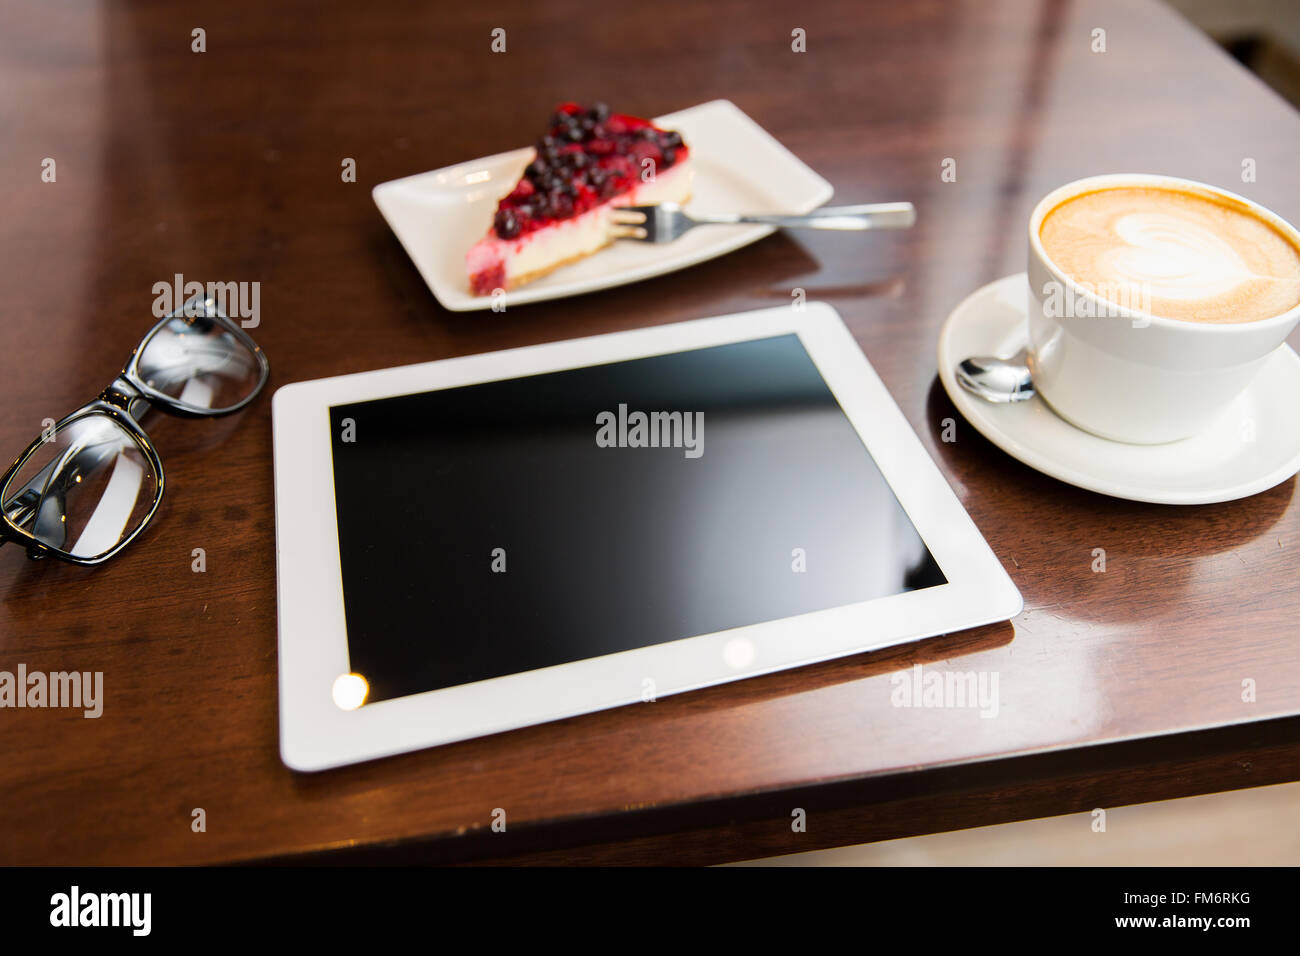 close up of tablet pc, coffee cup and cake Stock Photo